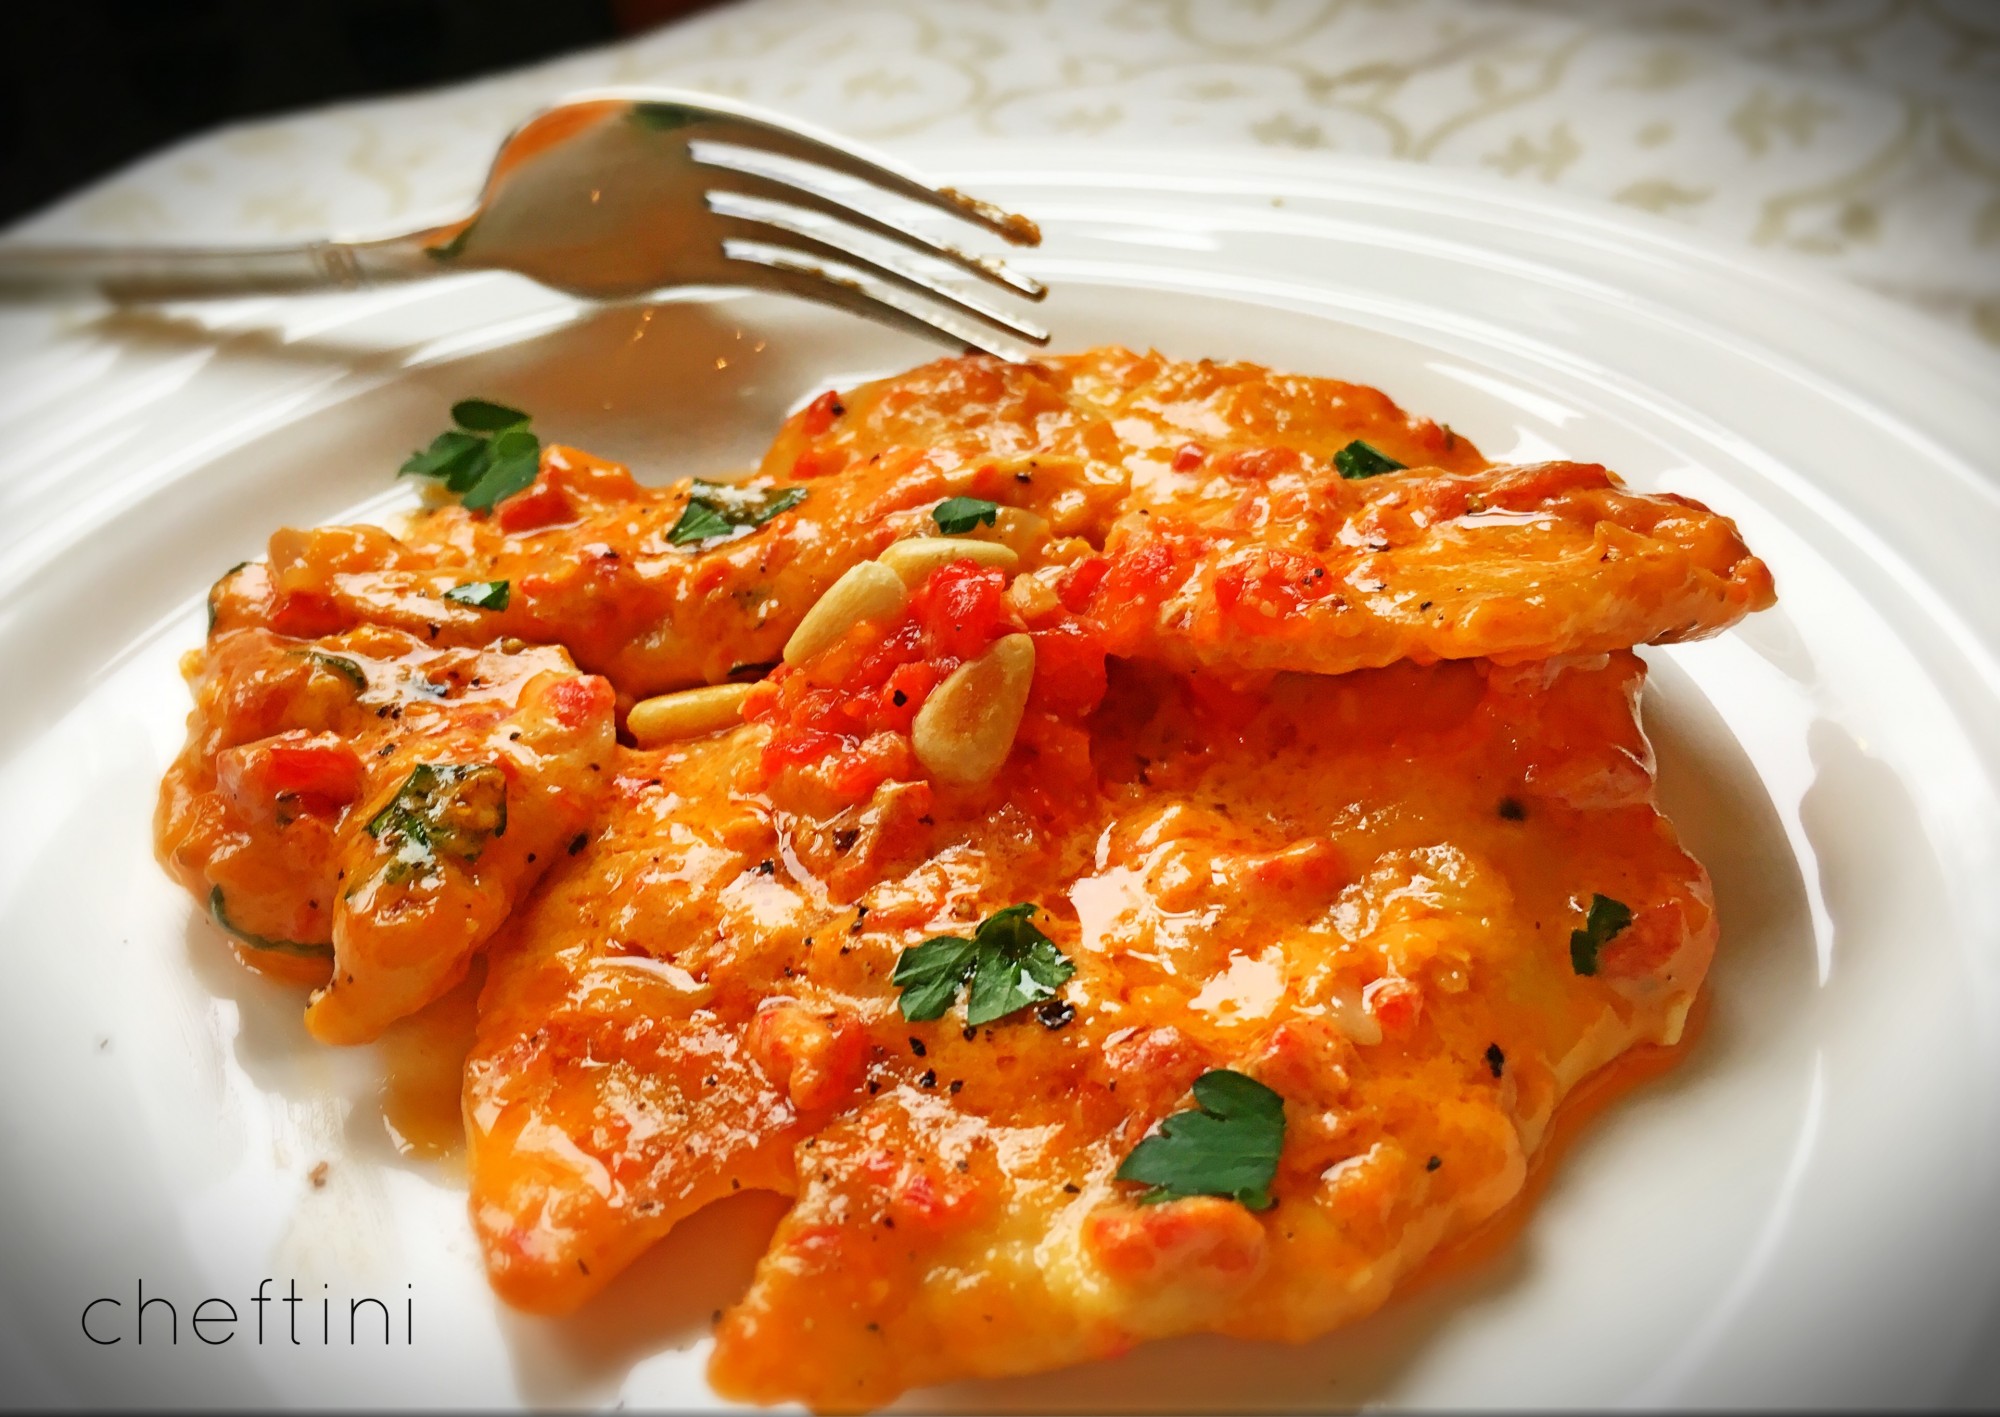 Chicken with Roasted Red Pepper Mascarpone Sauce